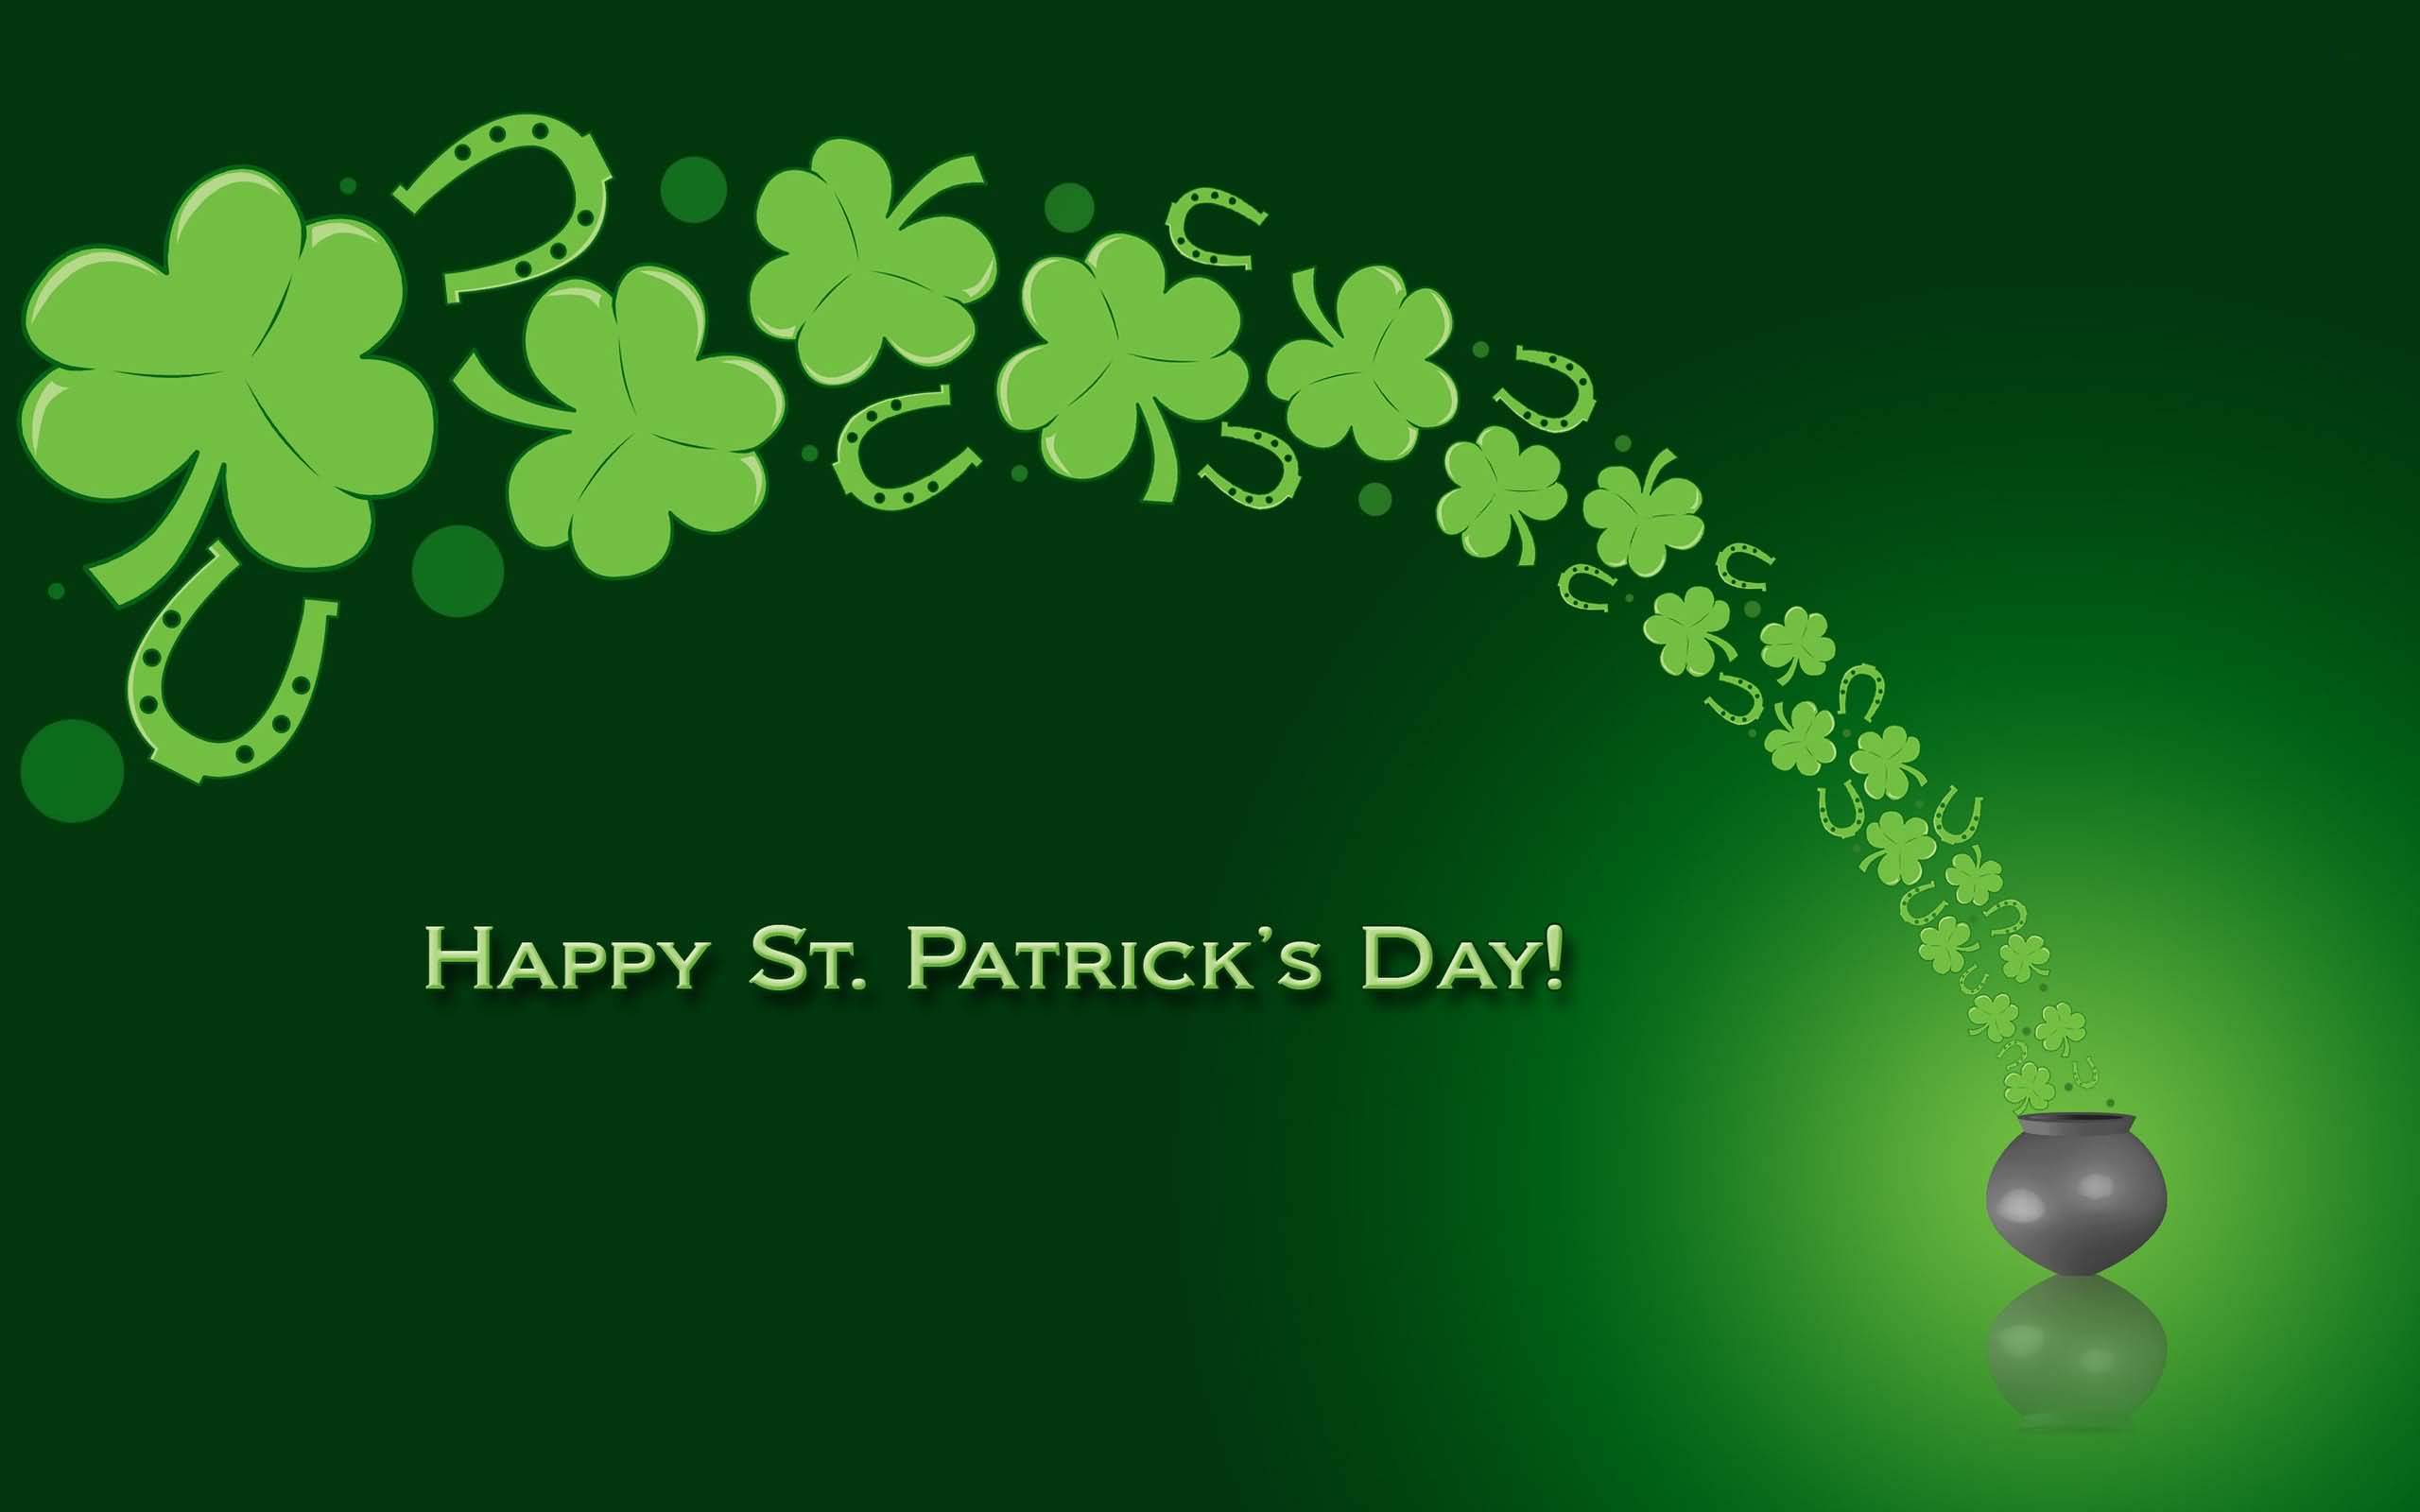 30 Best St. Patrick’s Day Wish Images & Greetings